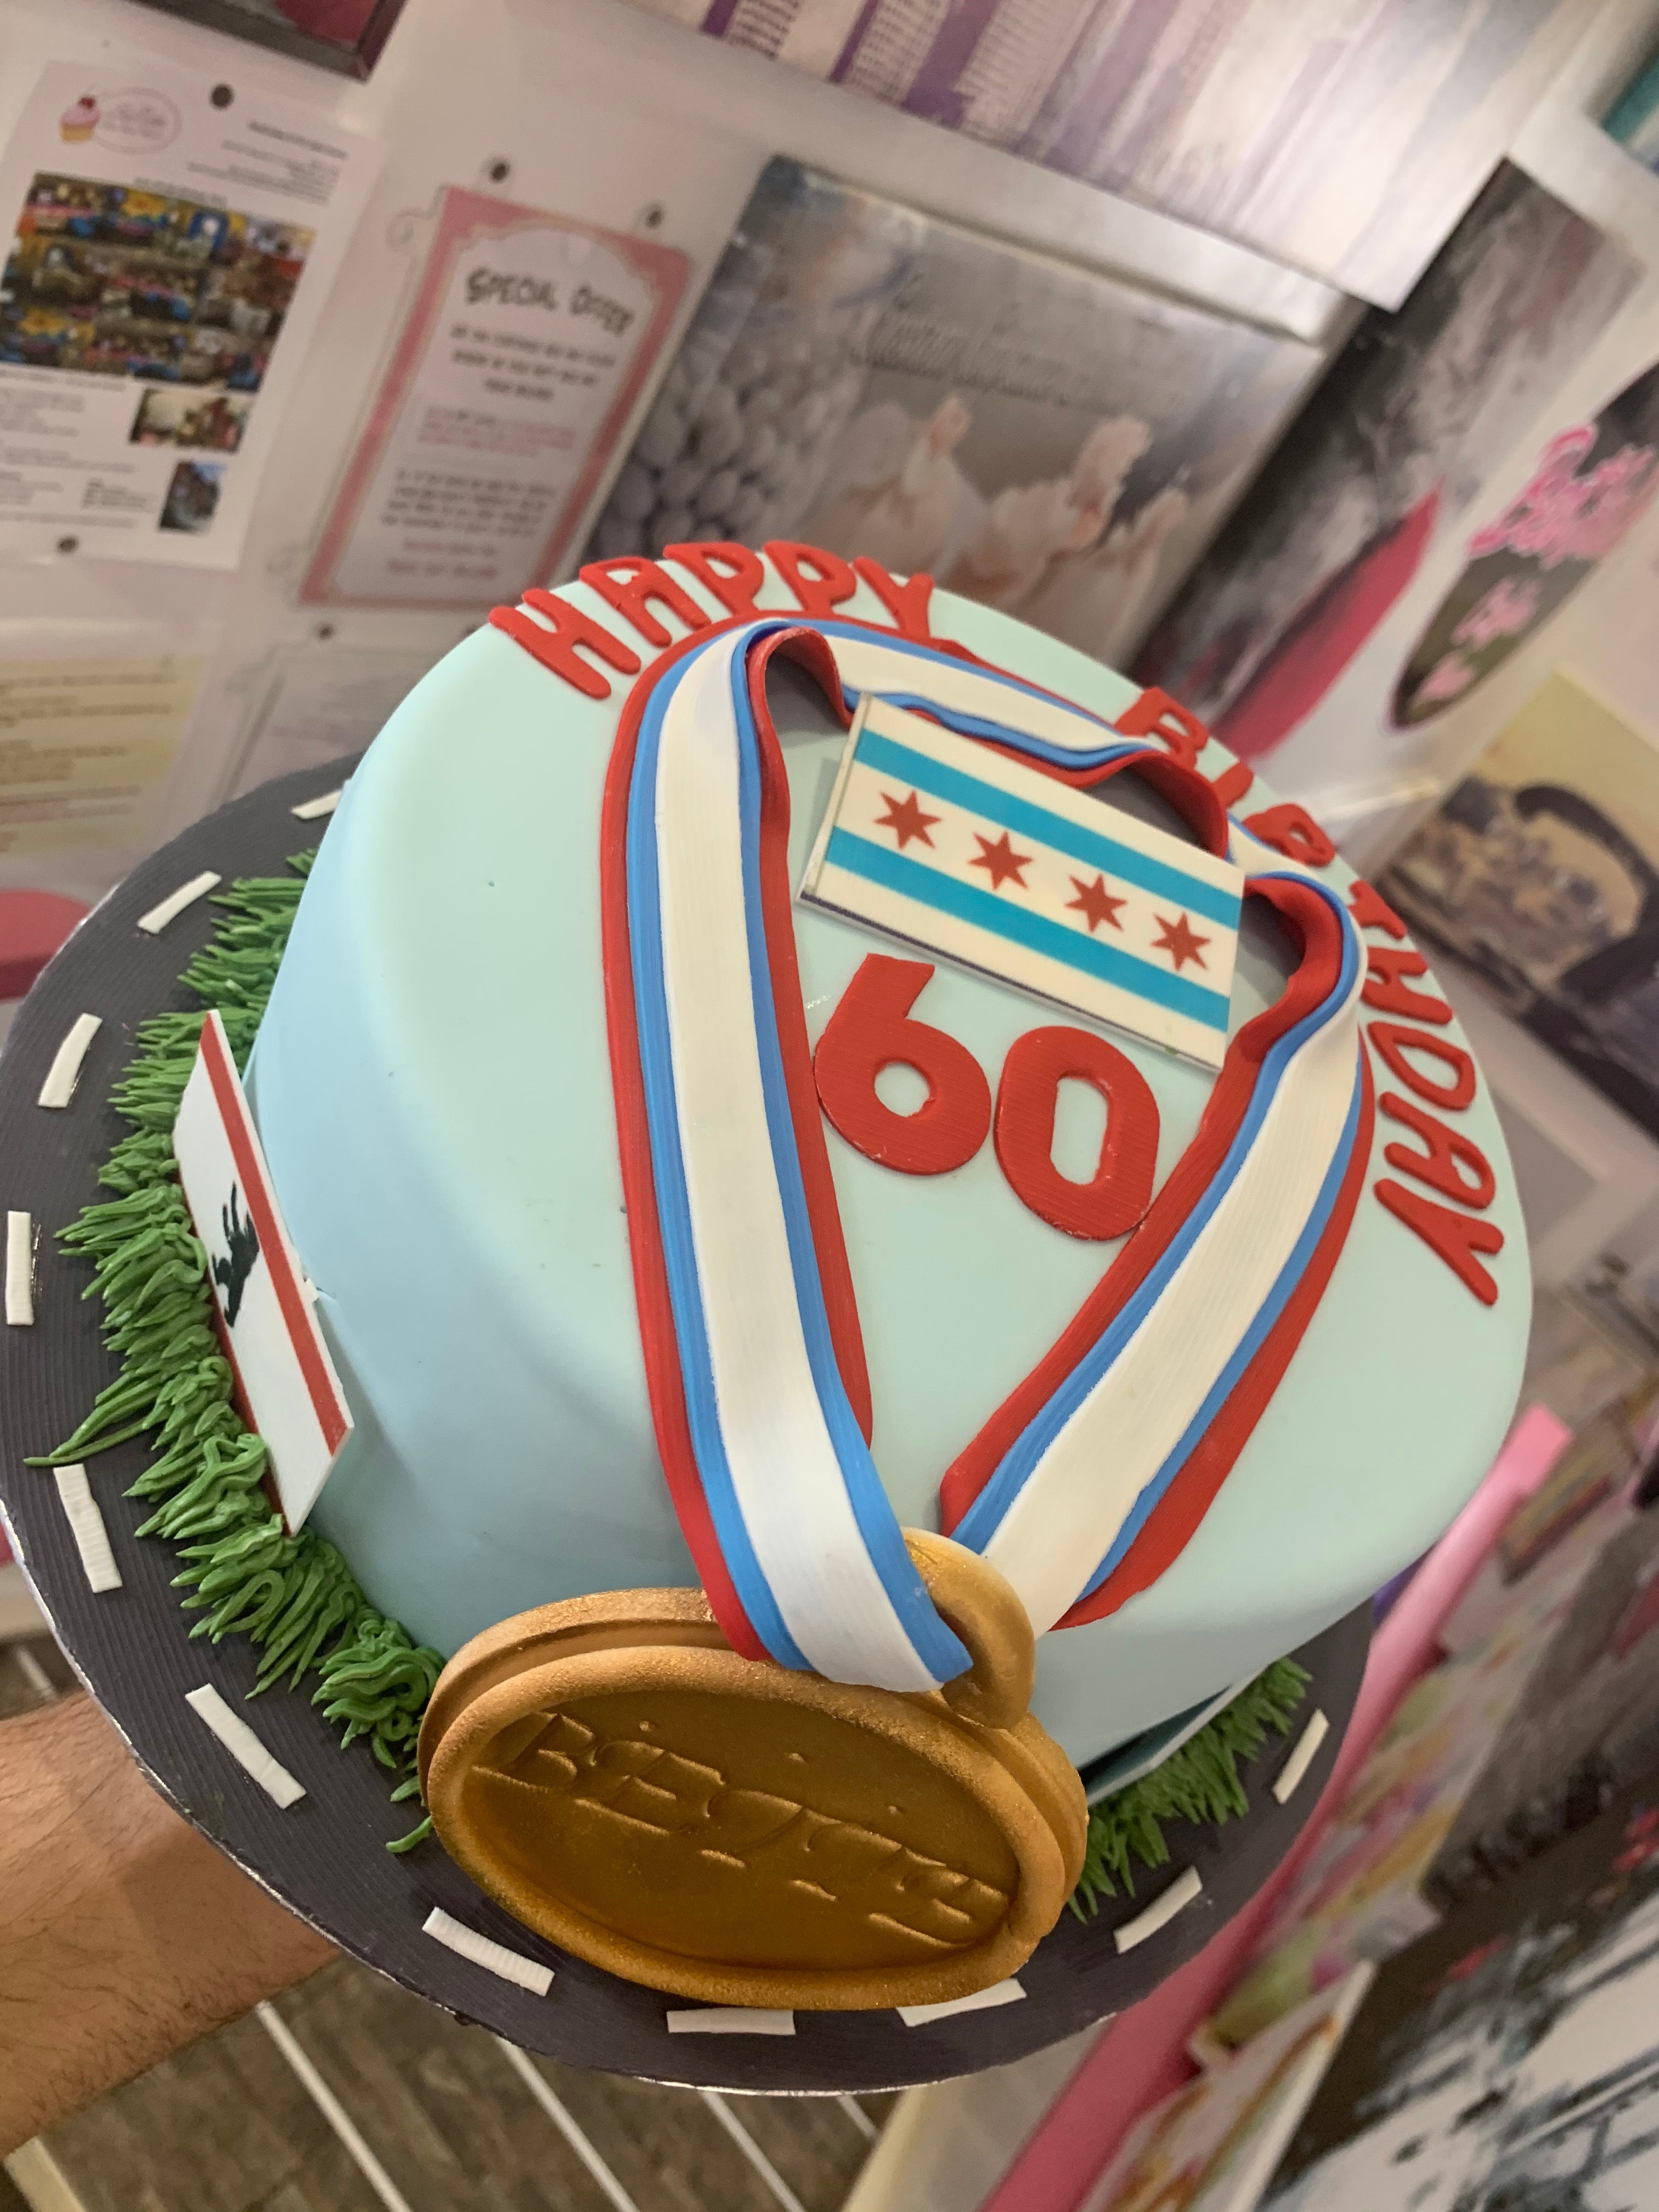 Cake with medal 1